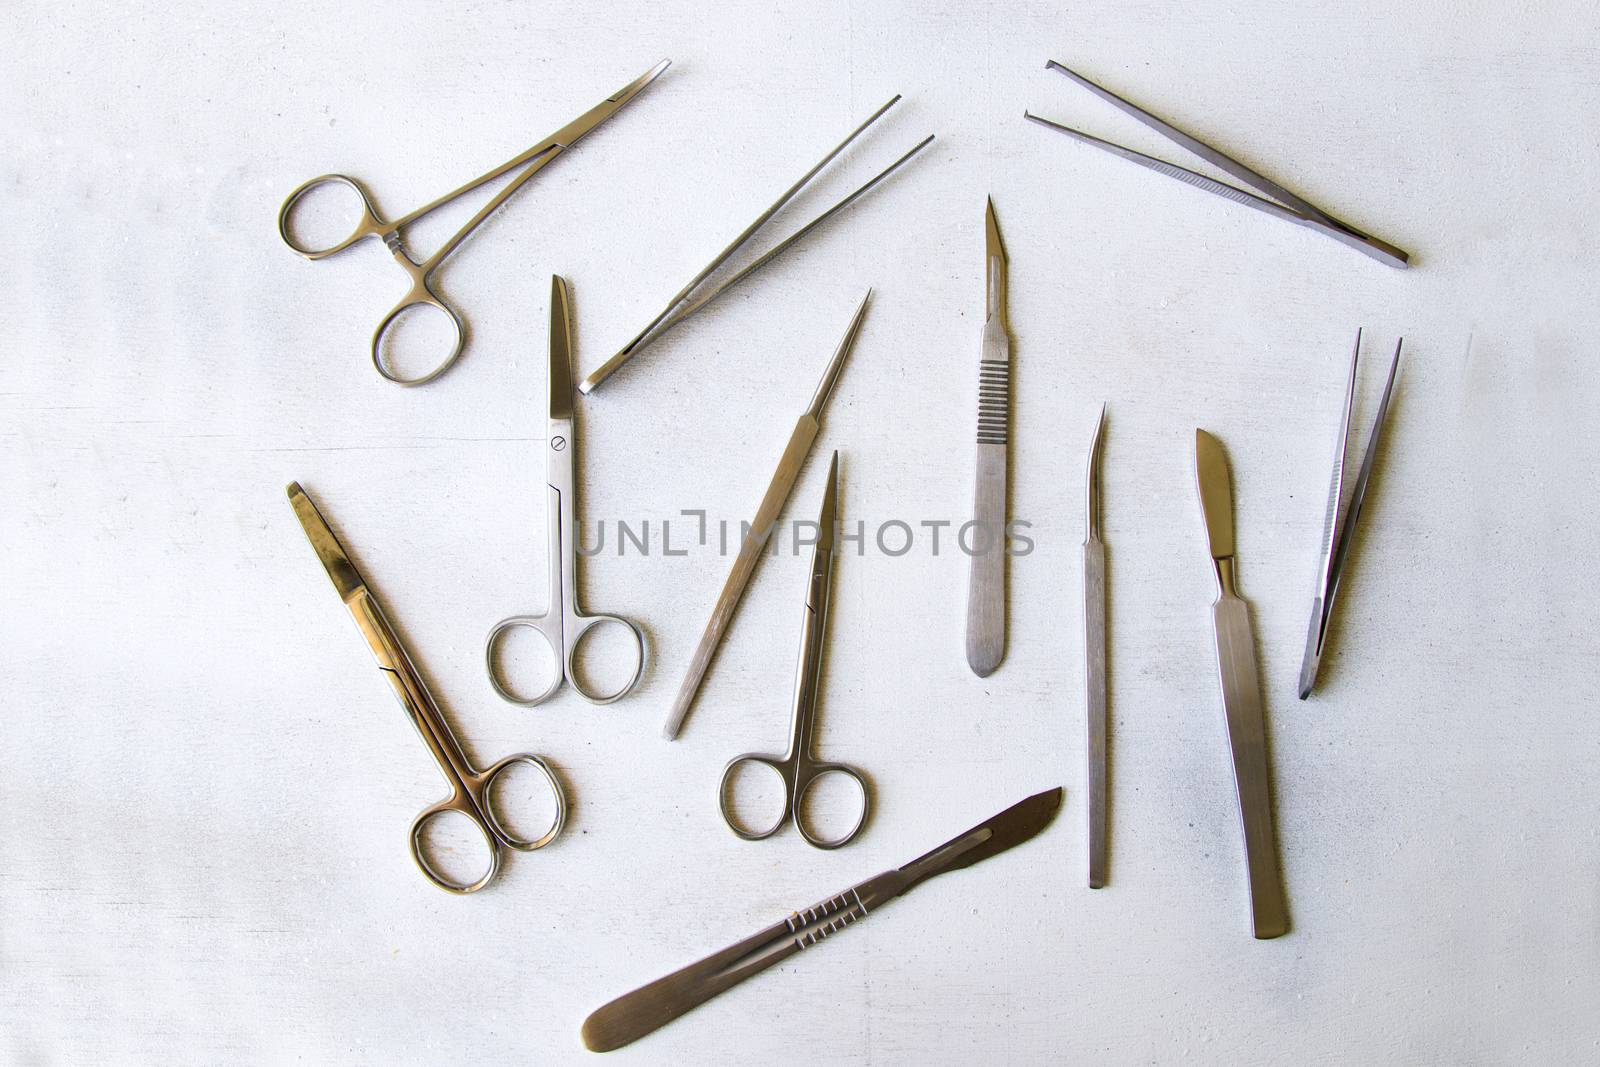 Dissection Kit - Stainless Steel Tools for Medical Students of Anatomy, Biology, Veterinary by Taidundua